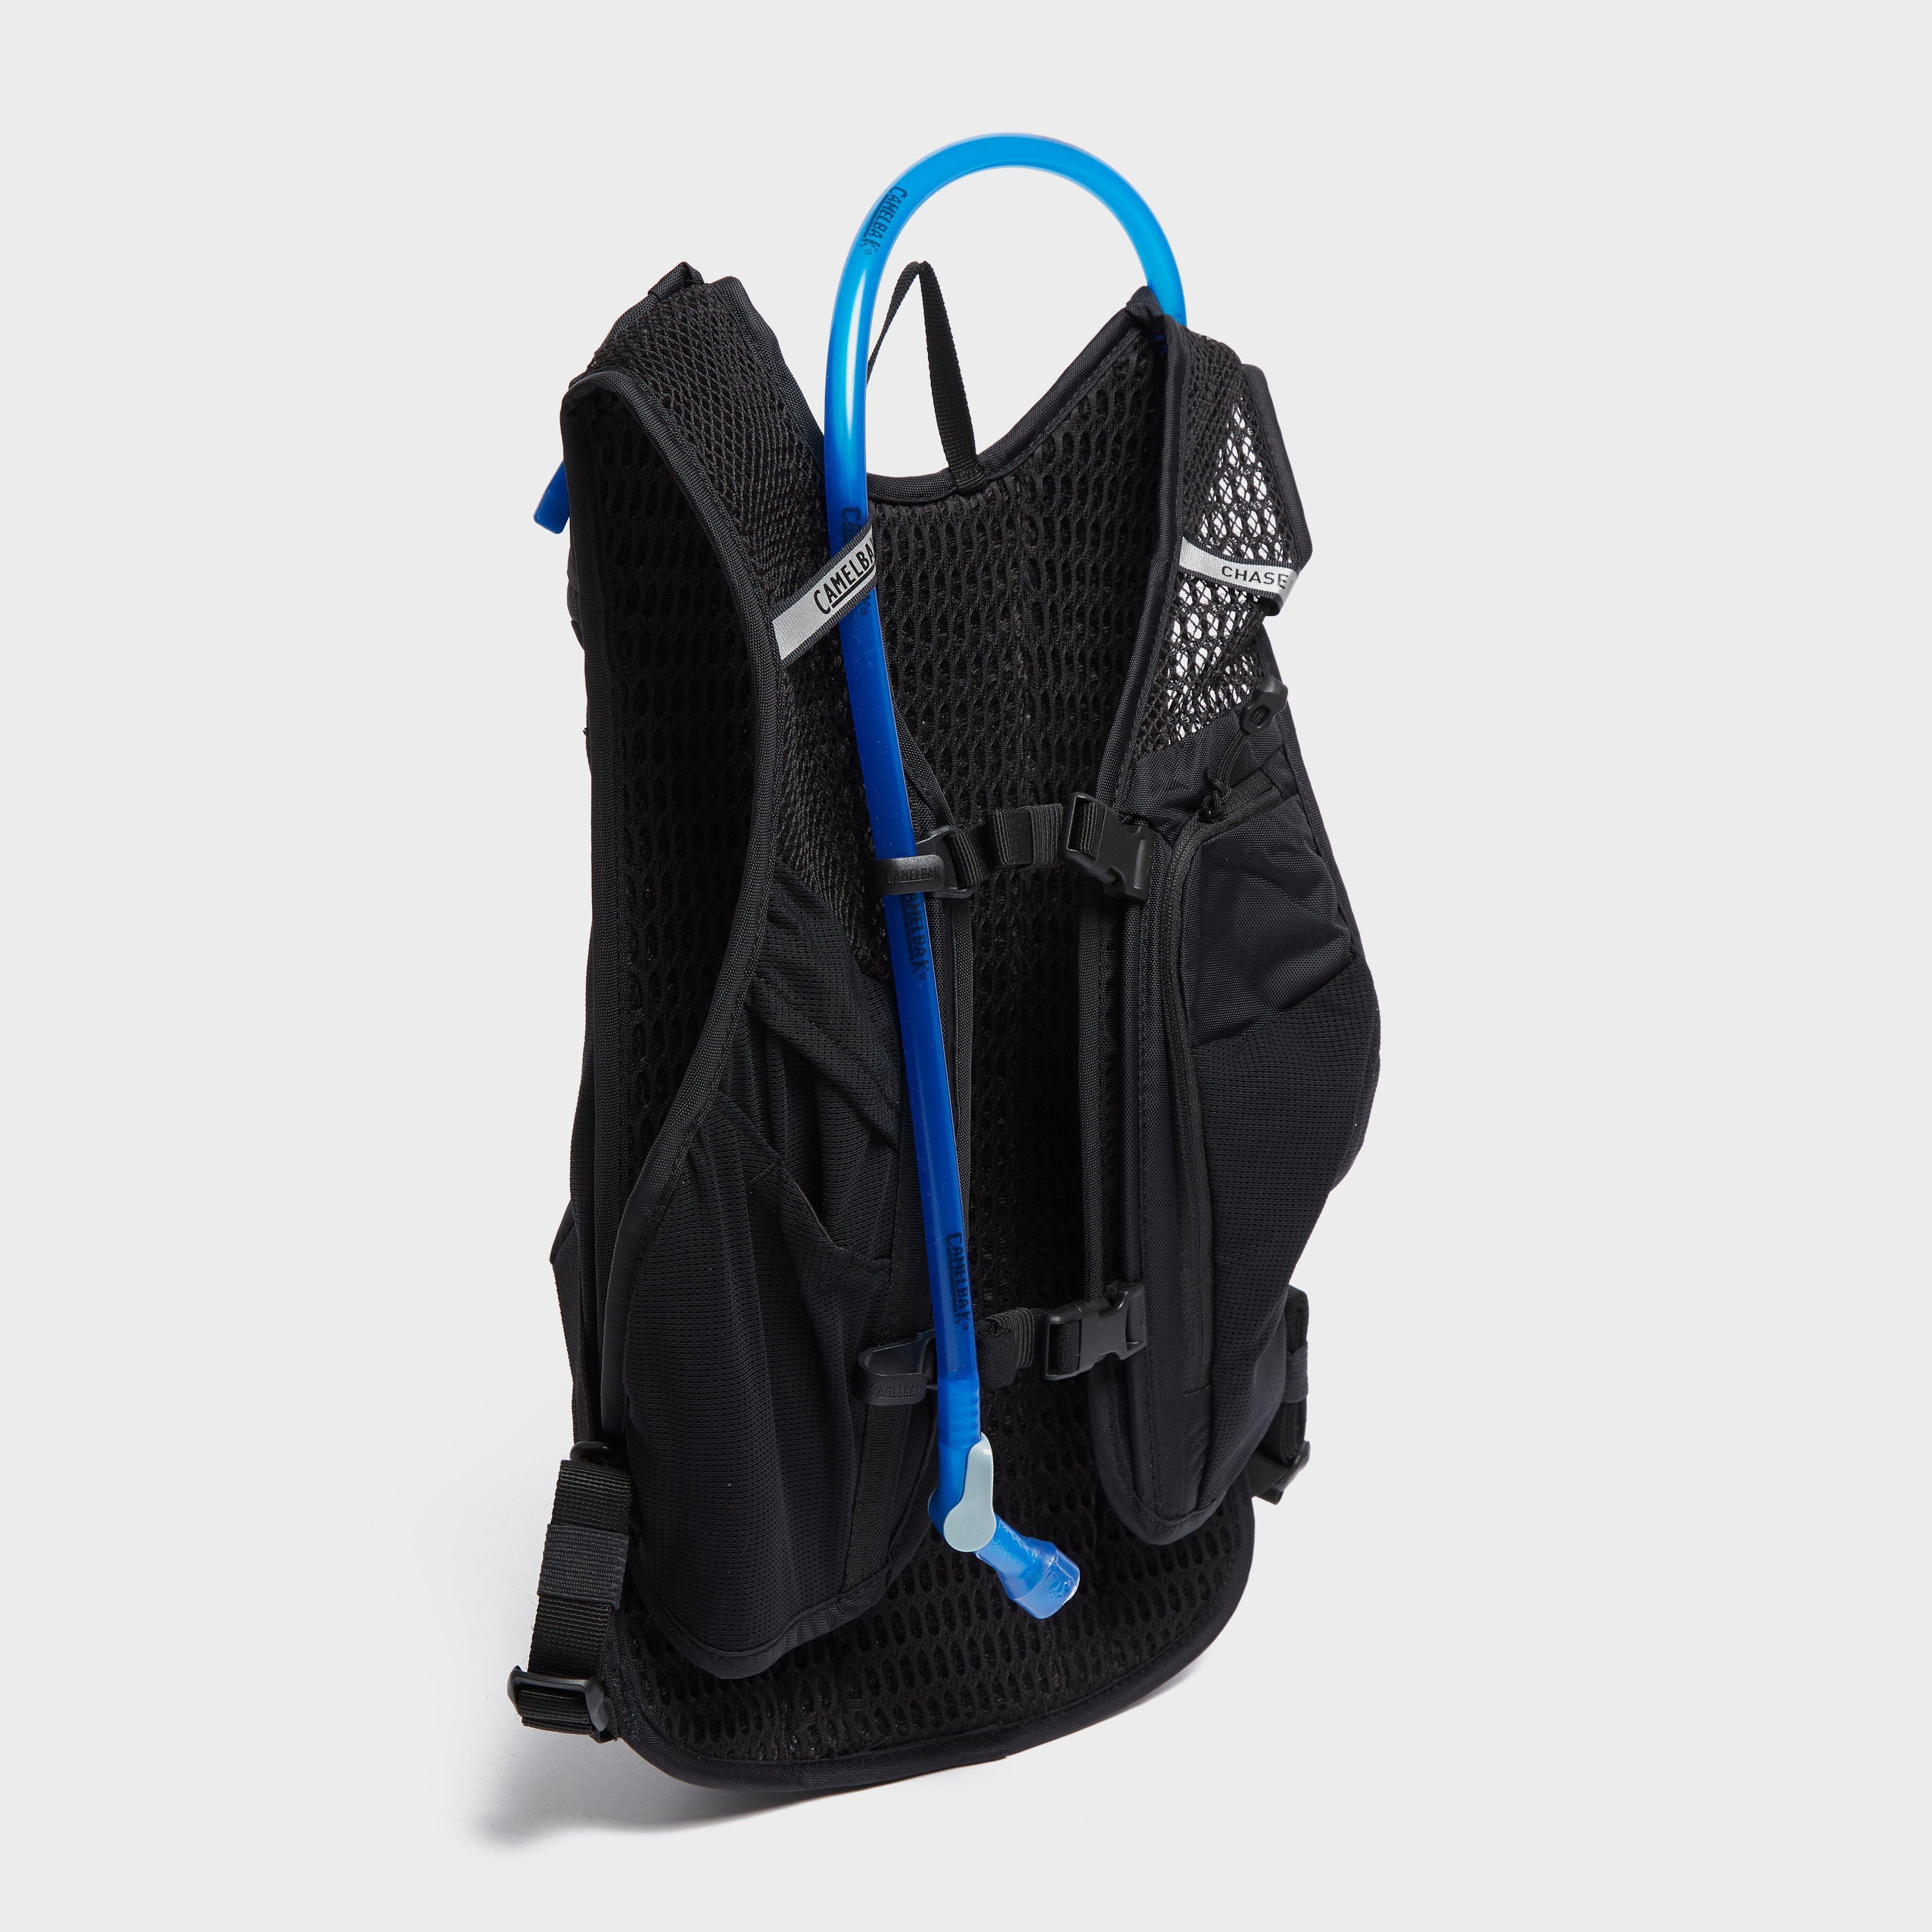 Camelbak Chase 8 Cycling Vest Review